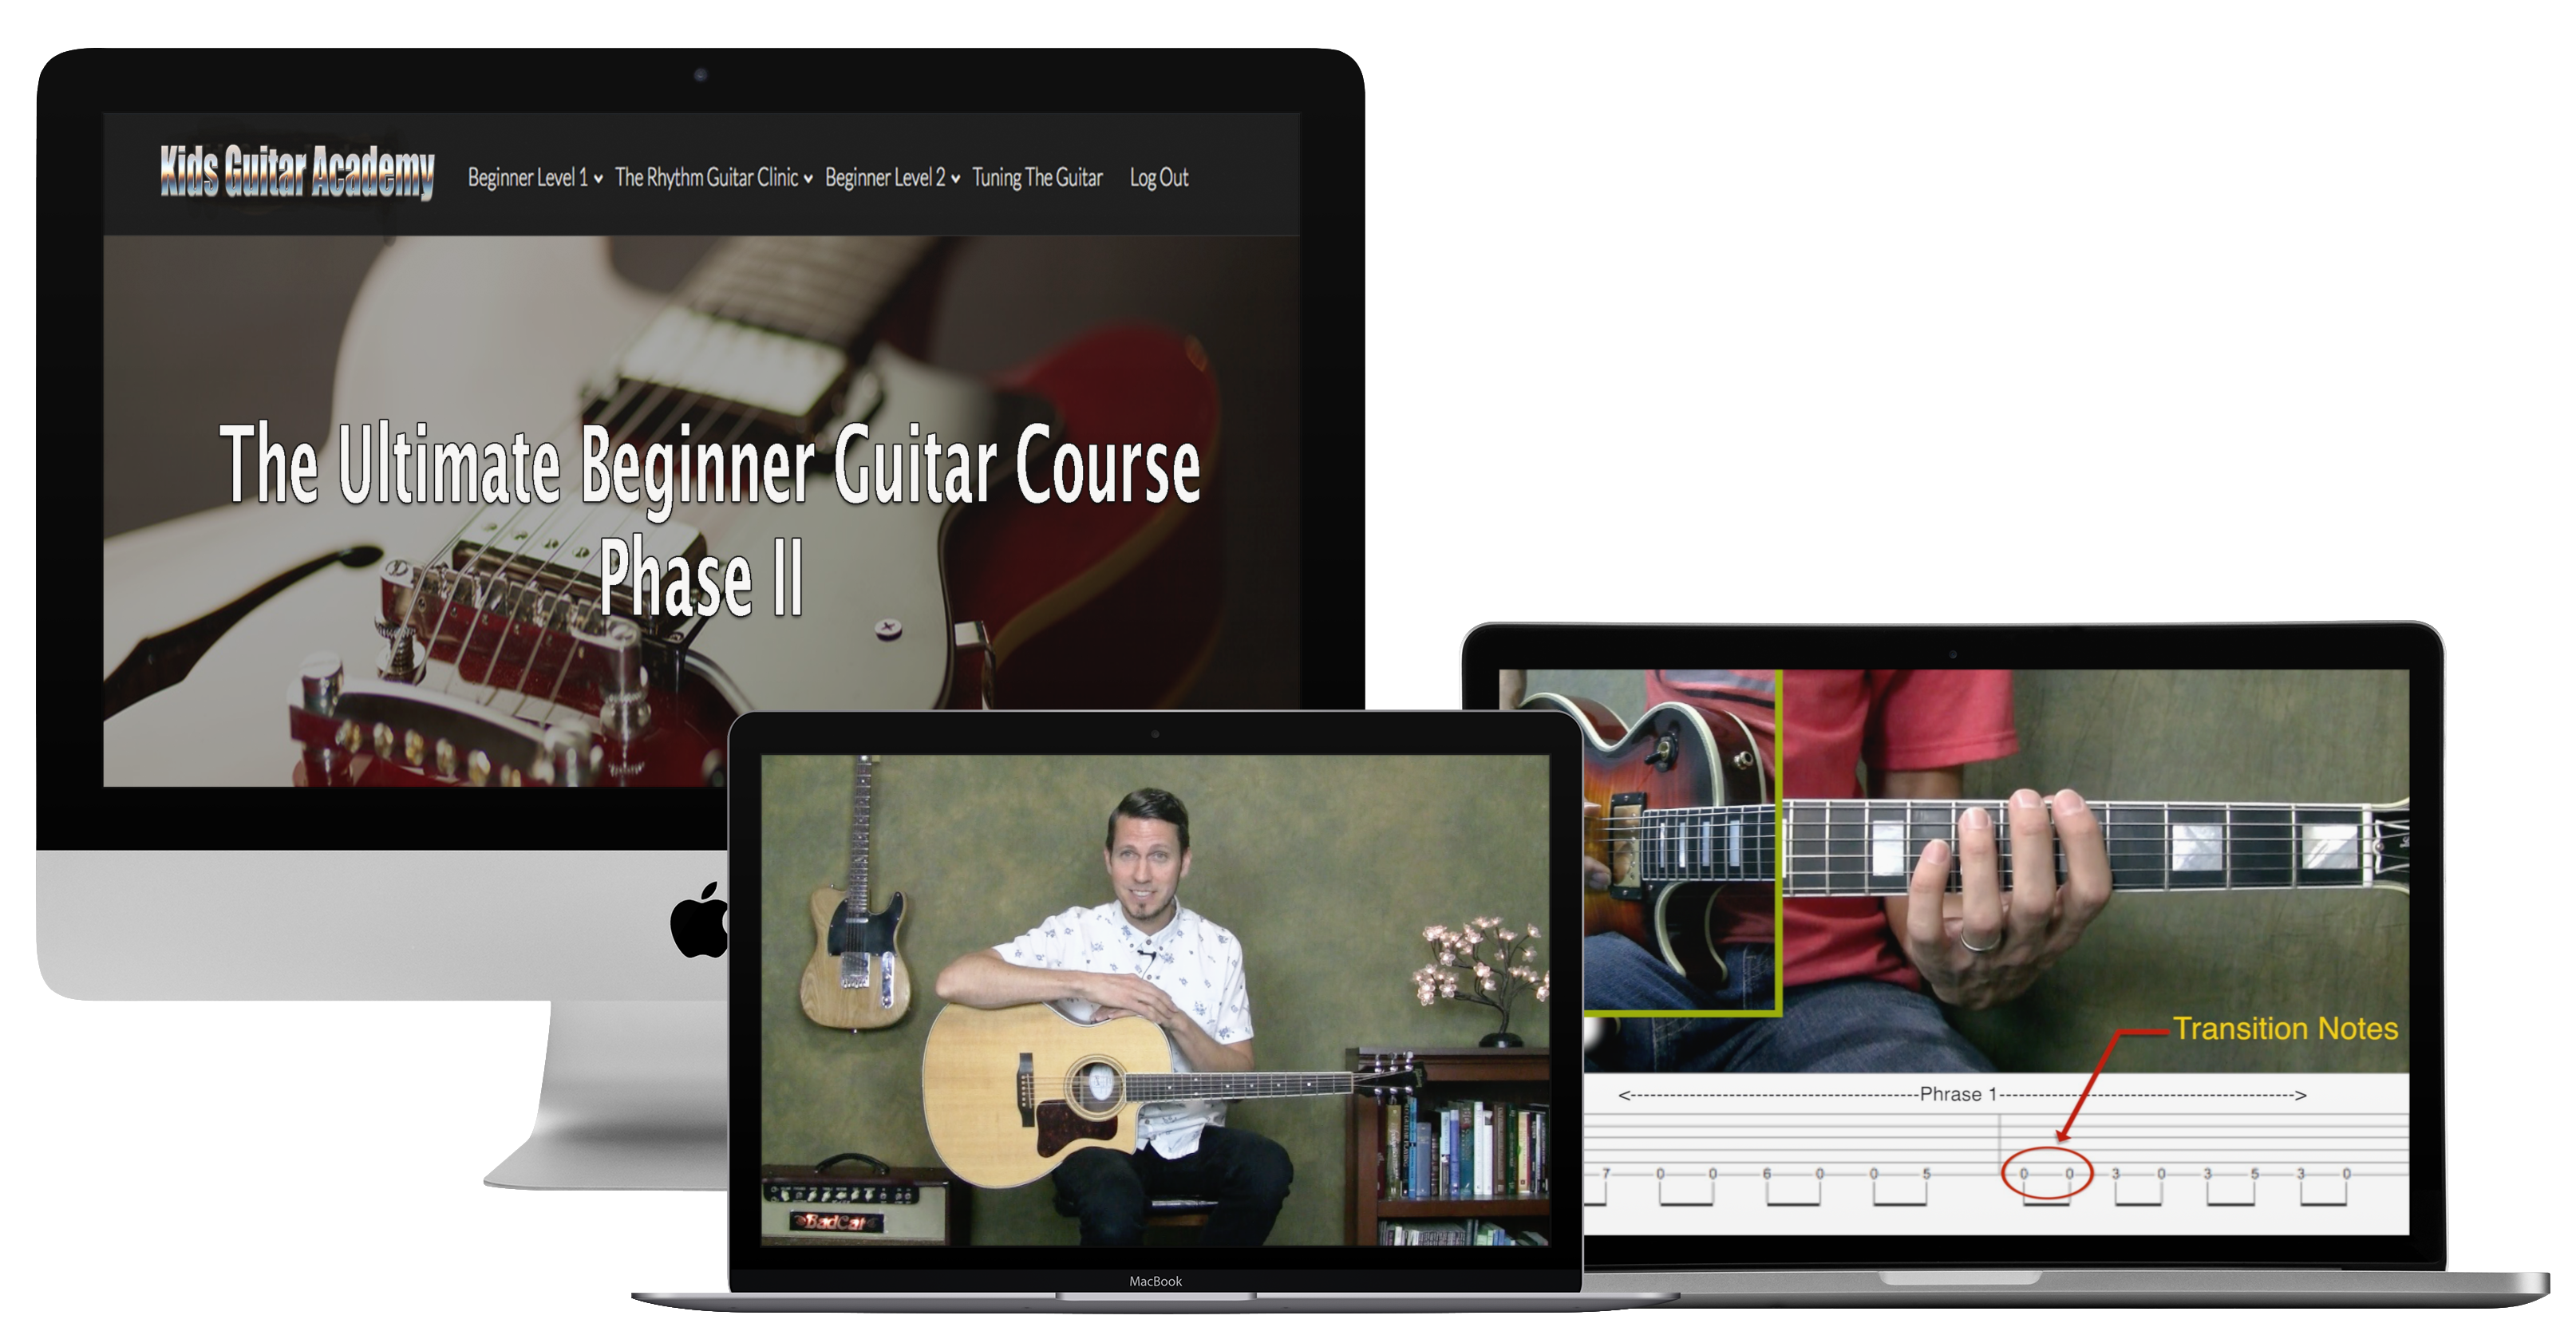 The Ultimate Beginner Guitar Course: Phase II